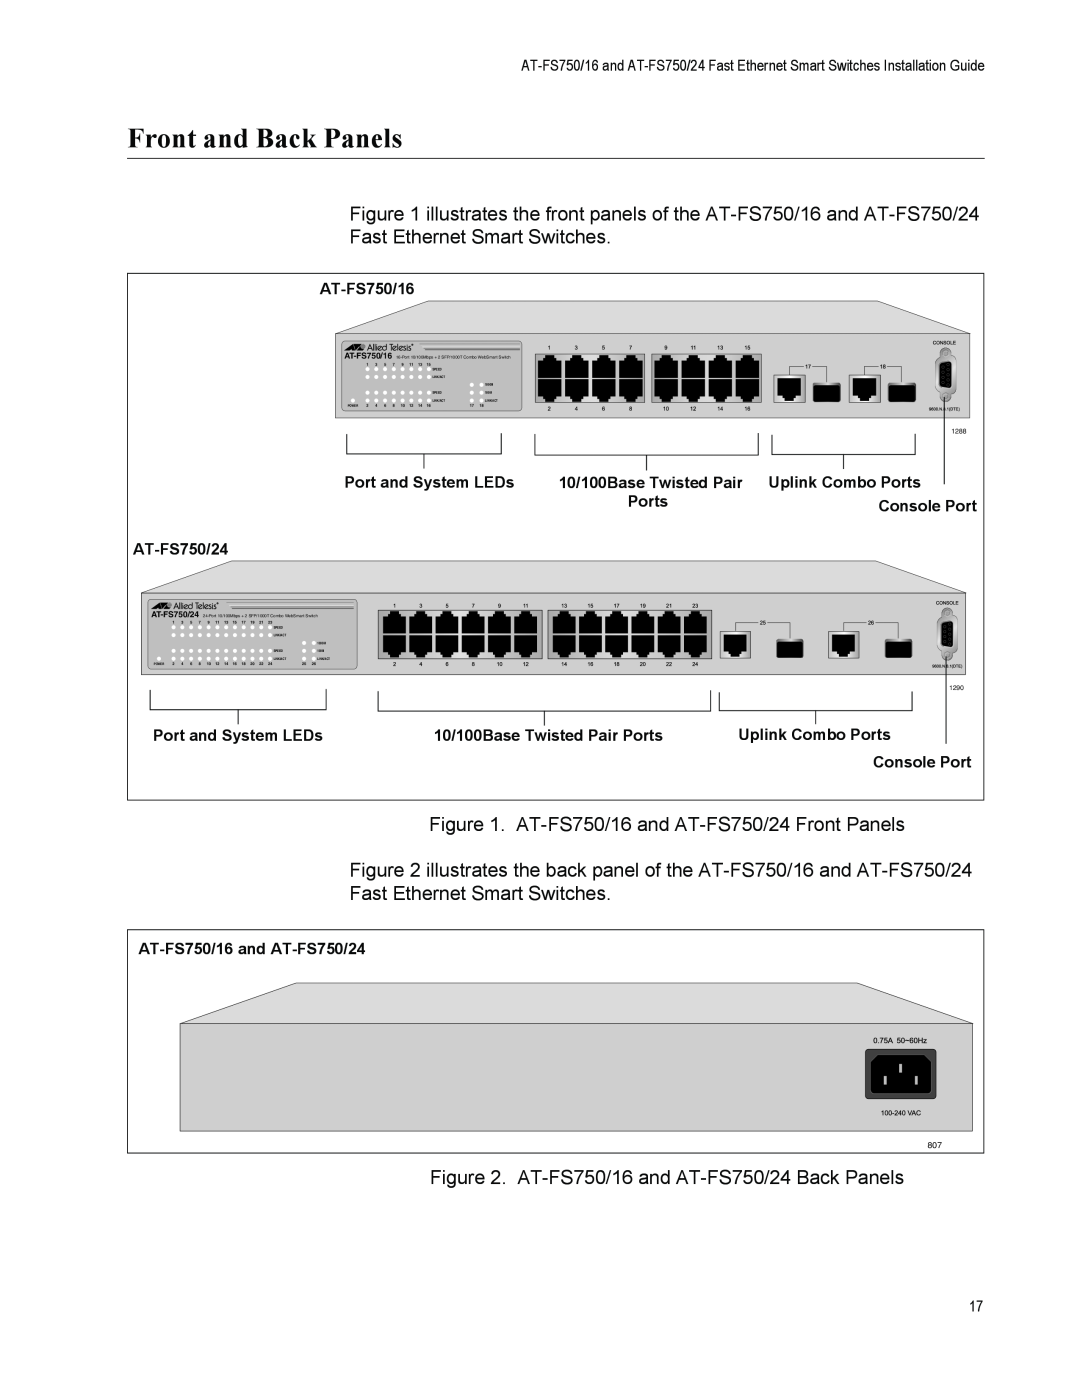 Allied Telesis FS750/24 manual Front and Back Panels, AT-FS750/16 16-Port 10/100Mbps + 2 SFP/1000T Combo WebSmart Switch 